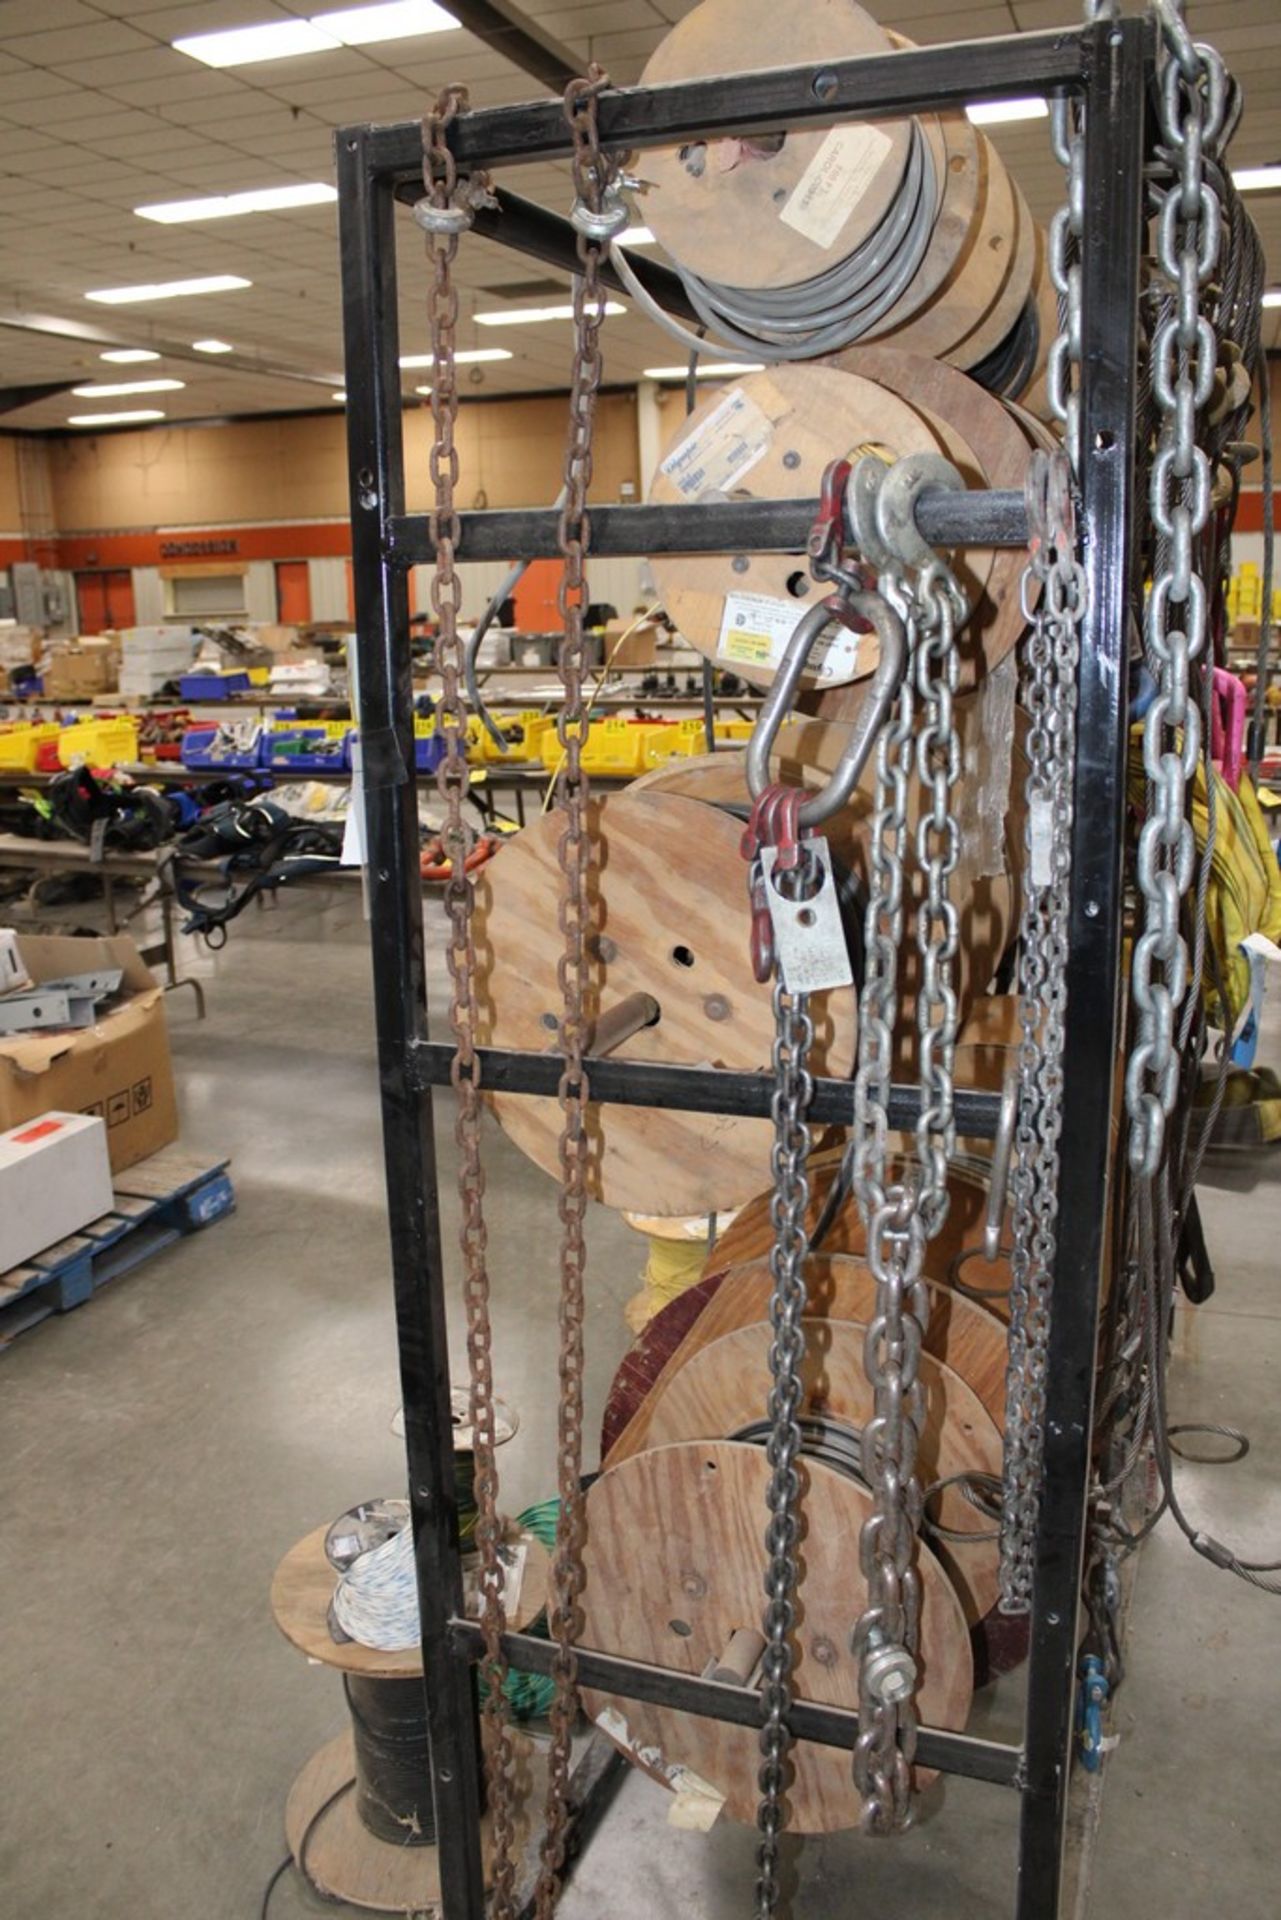 ASSORTED LIFTING CABLES, CHAINS & STRAPS ON RACK (RACK IS NOT INCLUDED) - Image 6 of 6